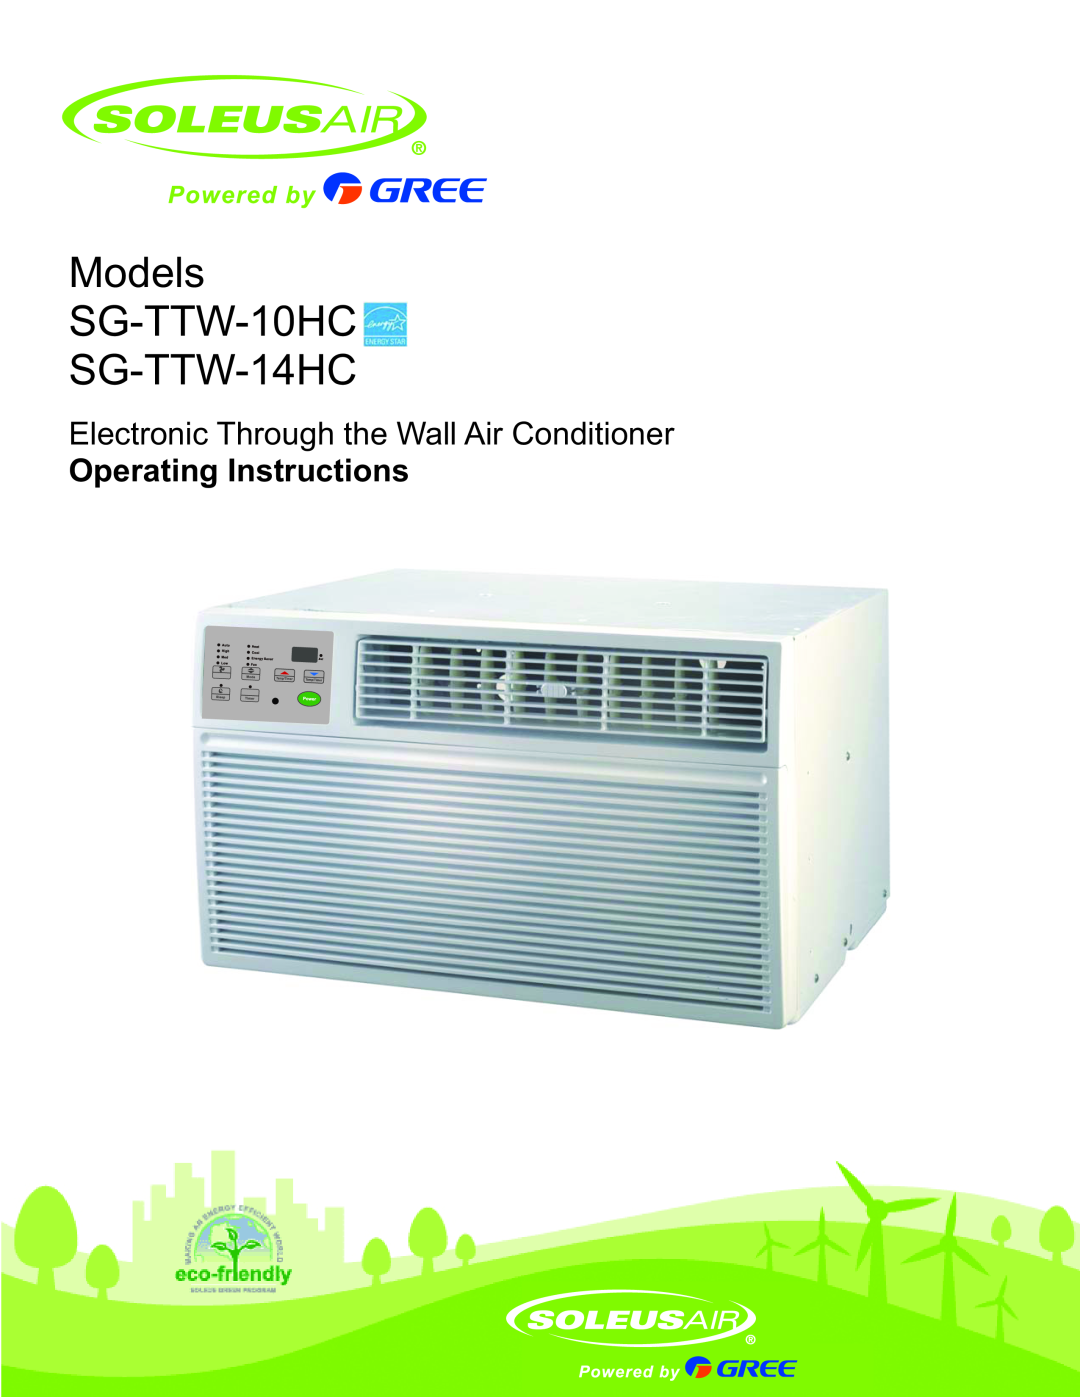 Soleus Air manual Model Number SG-TTW-14HC, Electronic Through the Wall Air Conditioner, Operating Instructions 